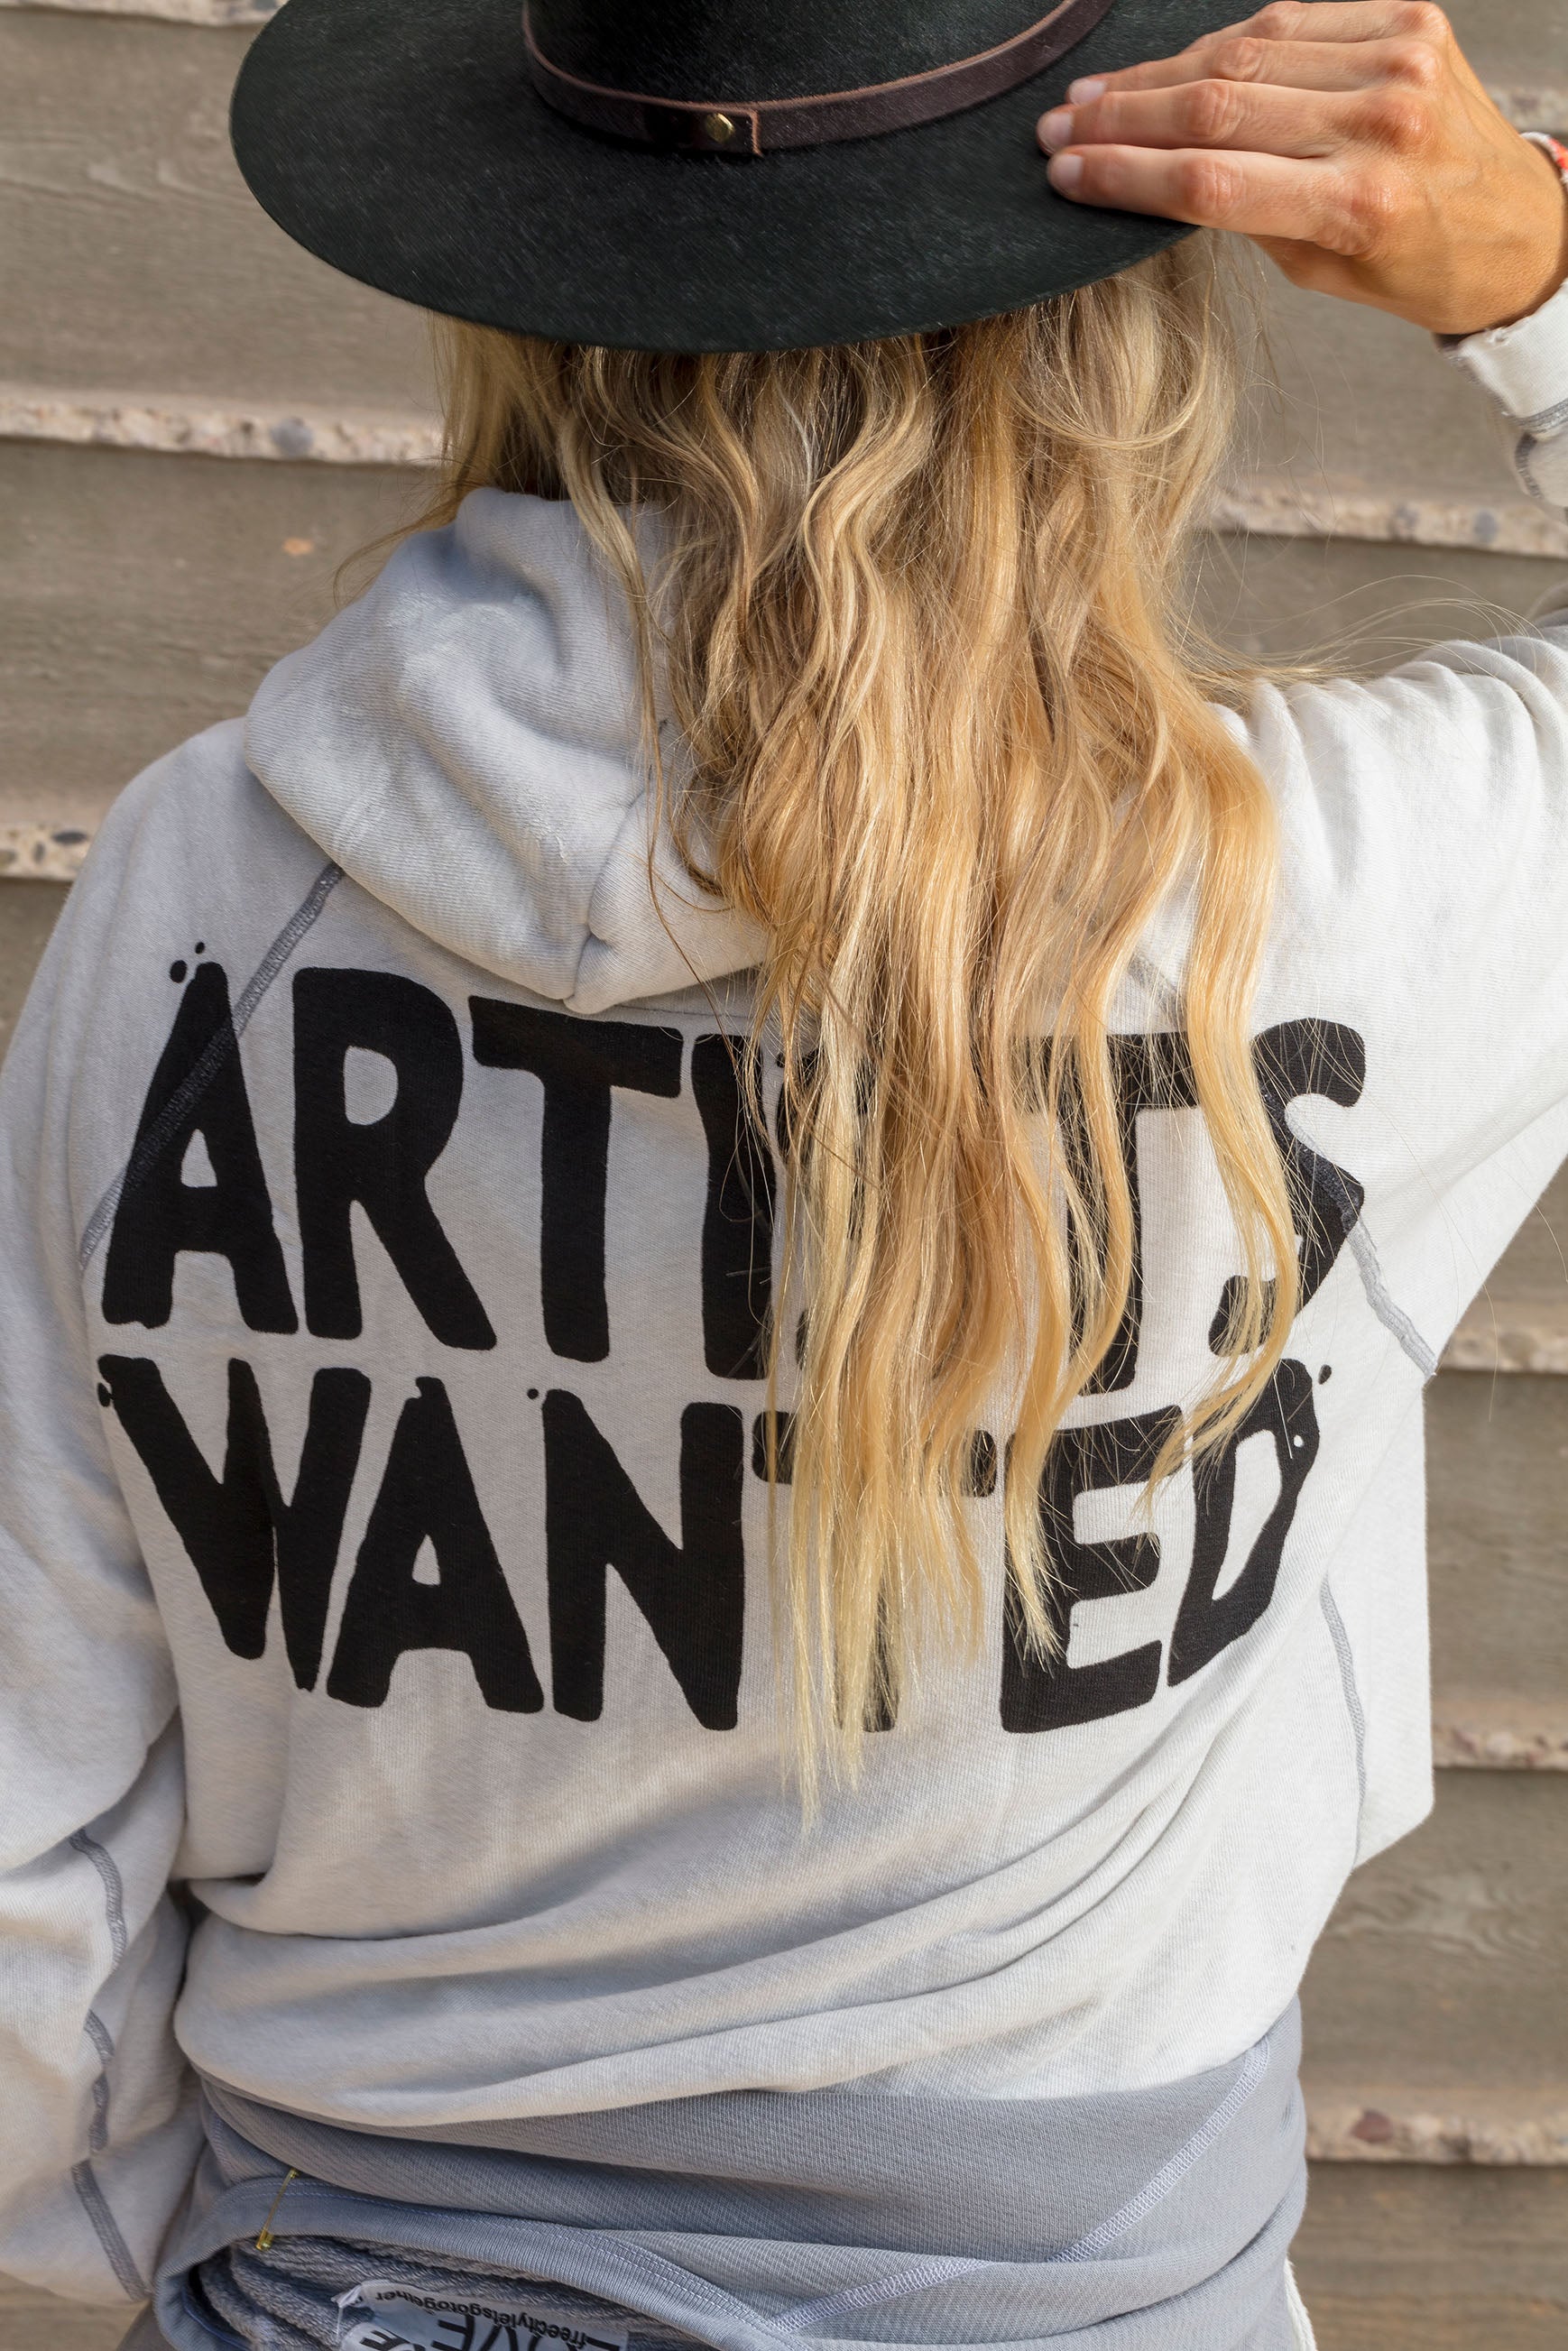 A woman from behind wearing a gray hoodie with the text "ARTISTS WANTED" in bold lettering, touching the brim of her black hat, with wavy blonde hair visible.